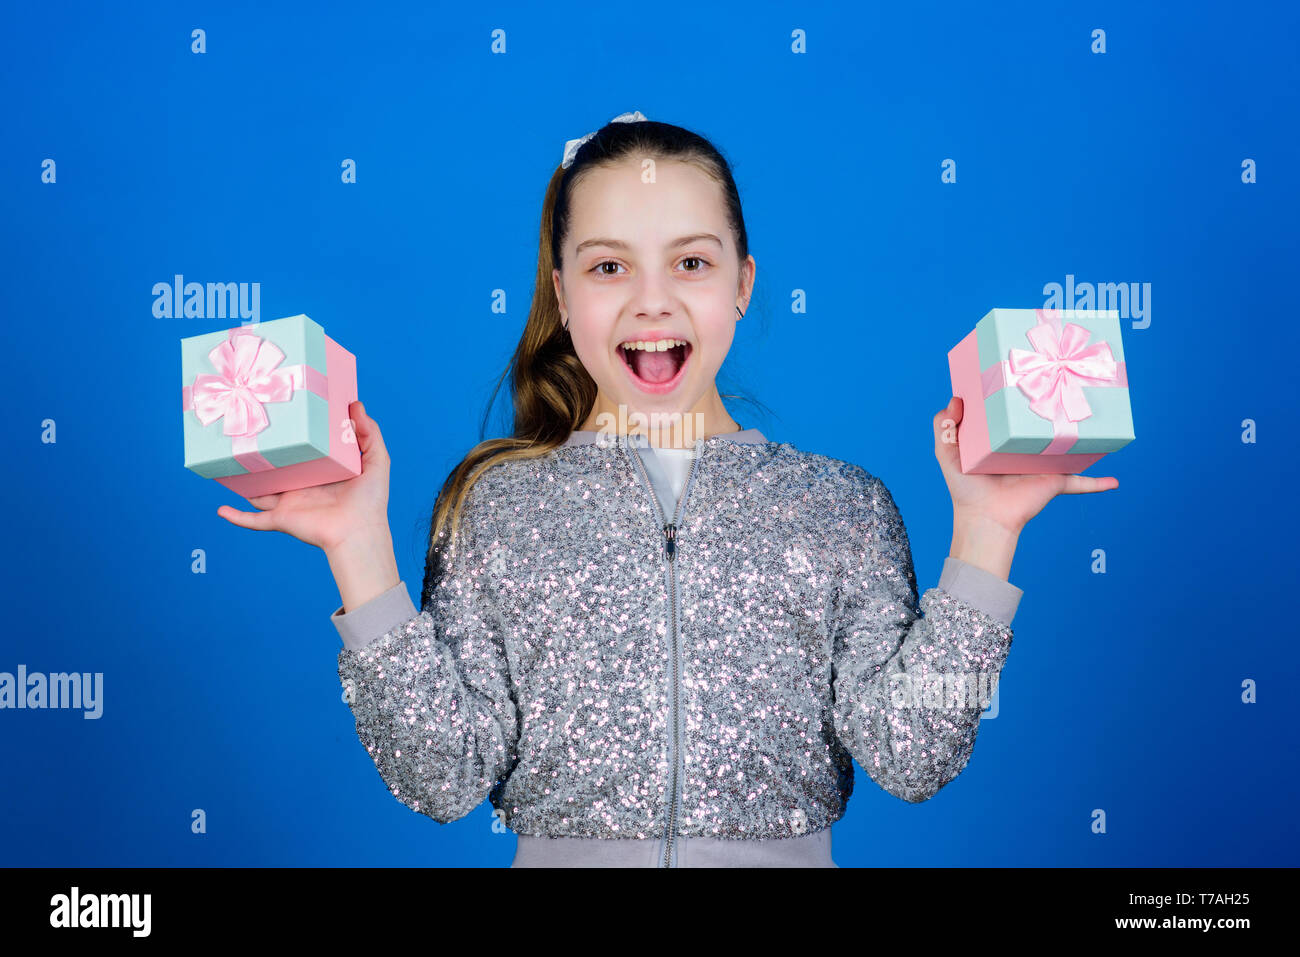 Girl with gift boxes blue background. Black friday. Shopping day. Cute child carry gift boxes. Surprise gift box. Birthday wish list. World of happiness. Pick bonus. Special happens every day. Stock Photo